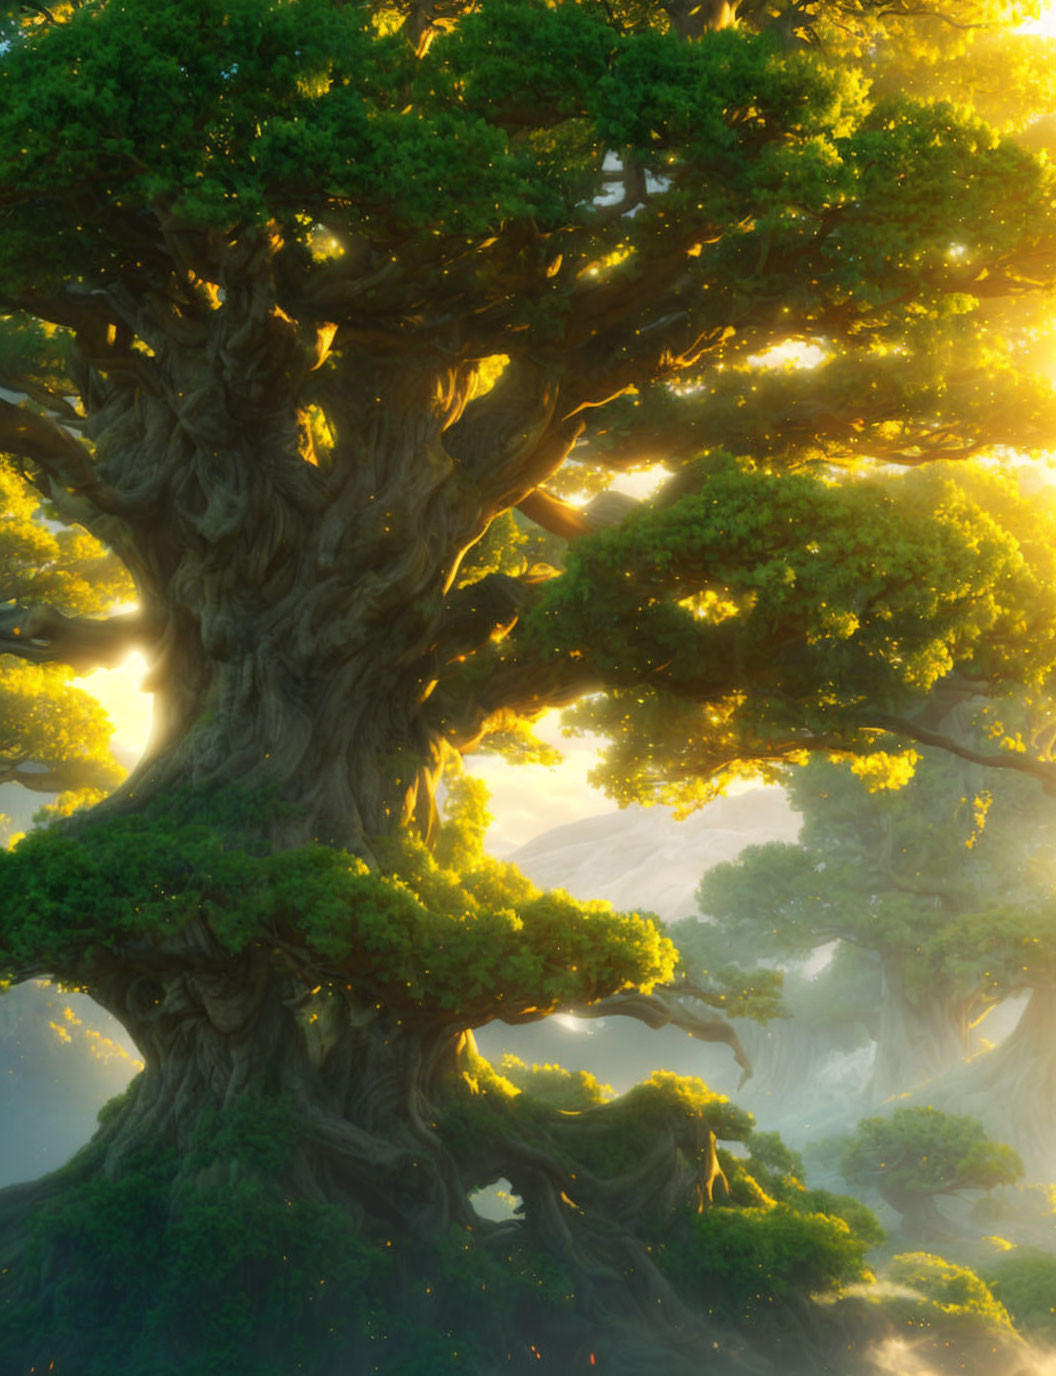 Ancient trees in mystical forest bathed in warm sunlight